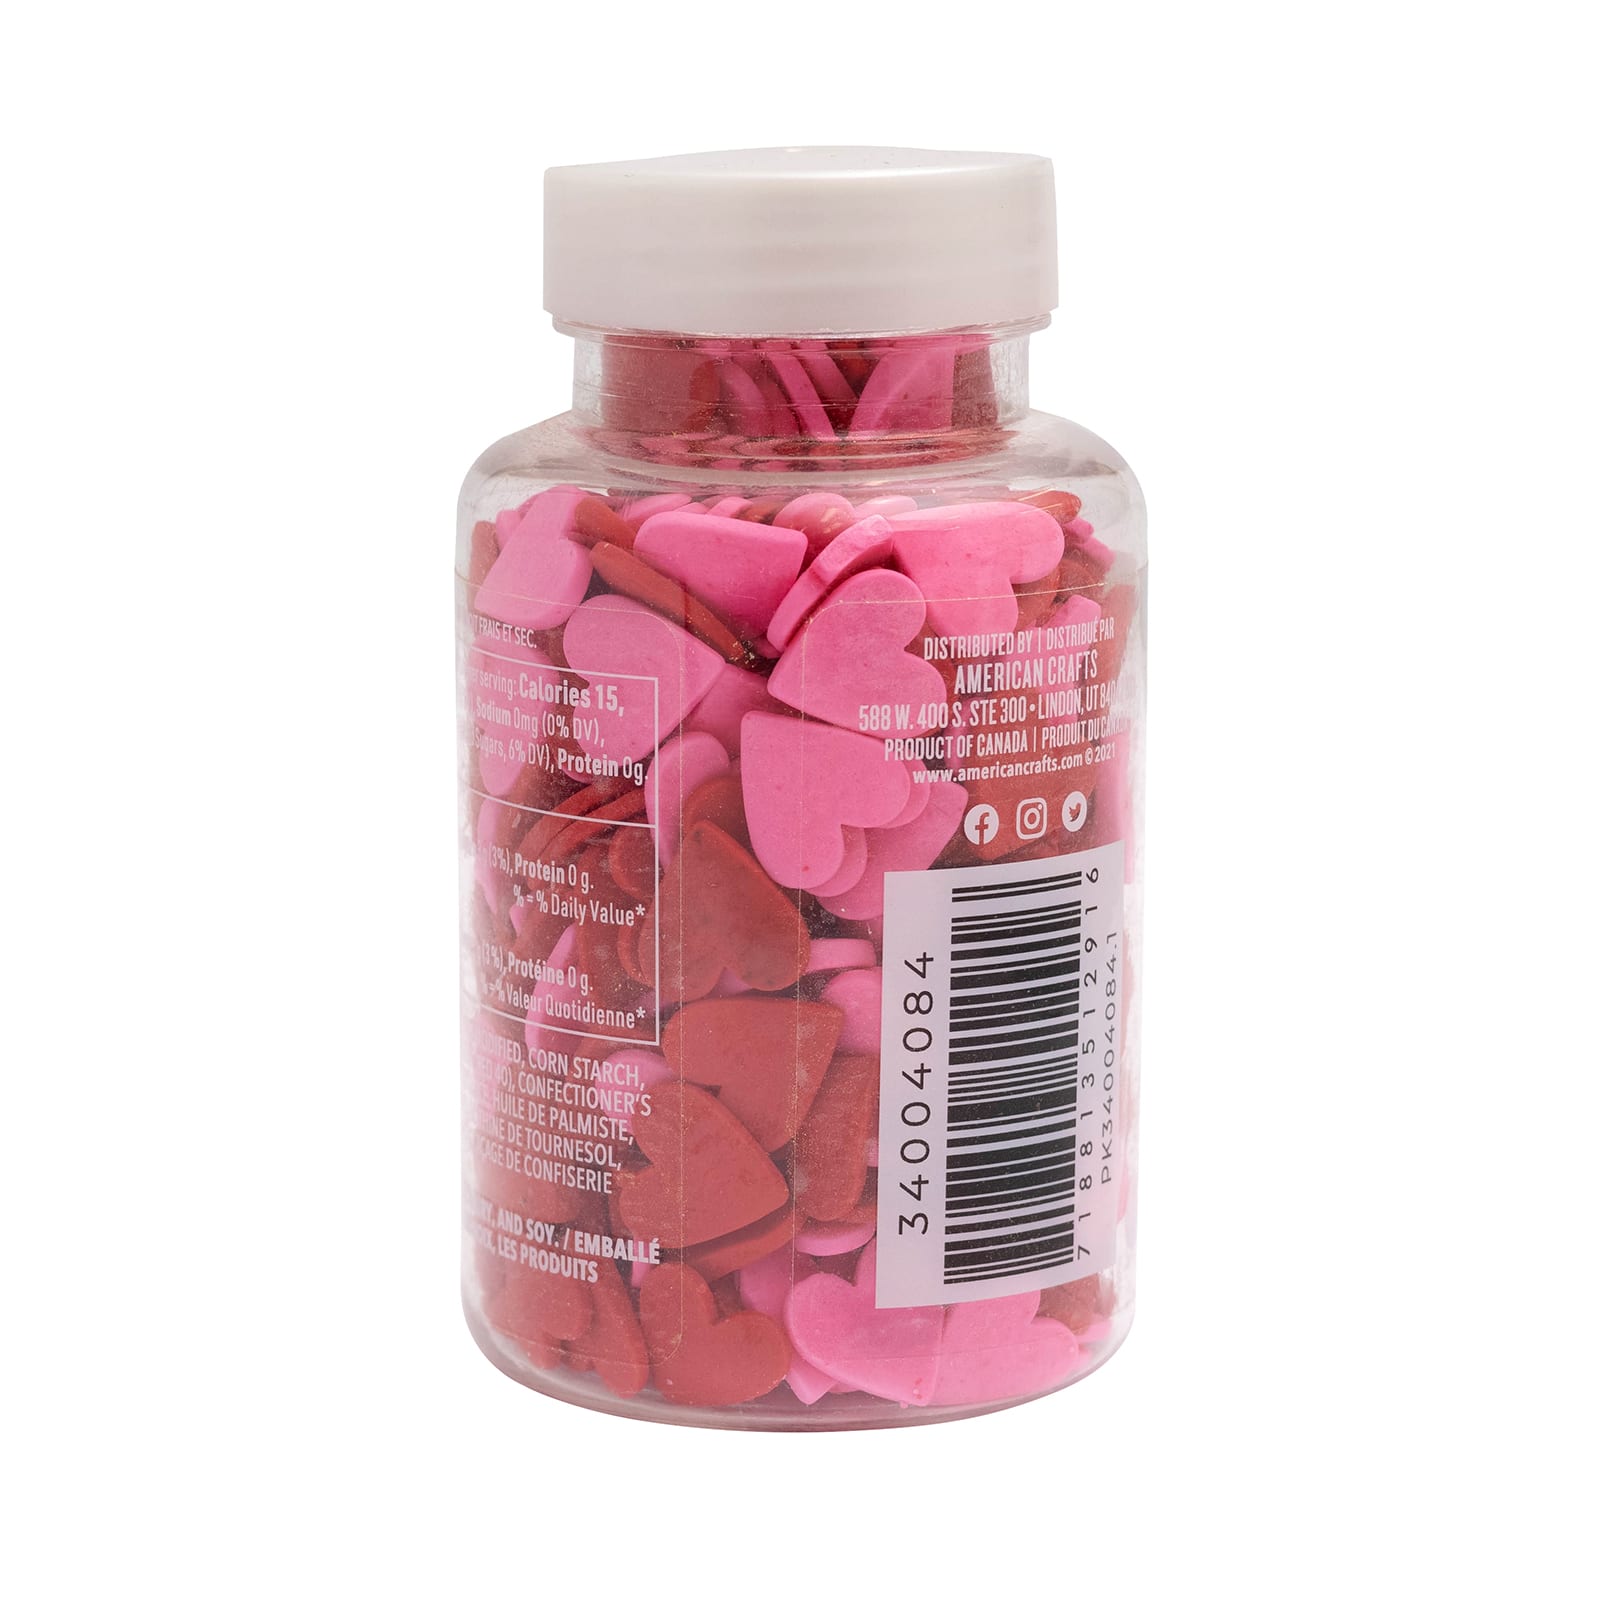 Sweet Tooth Fairy Red & Pink Hearts Candy Shapes | Michaels